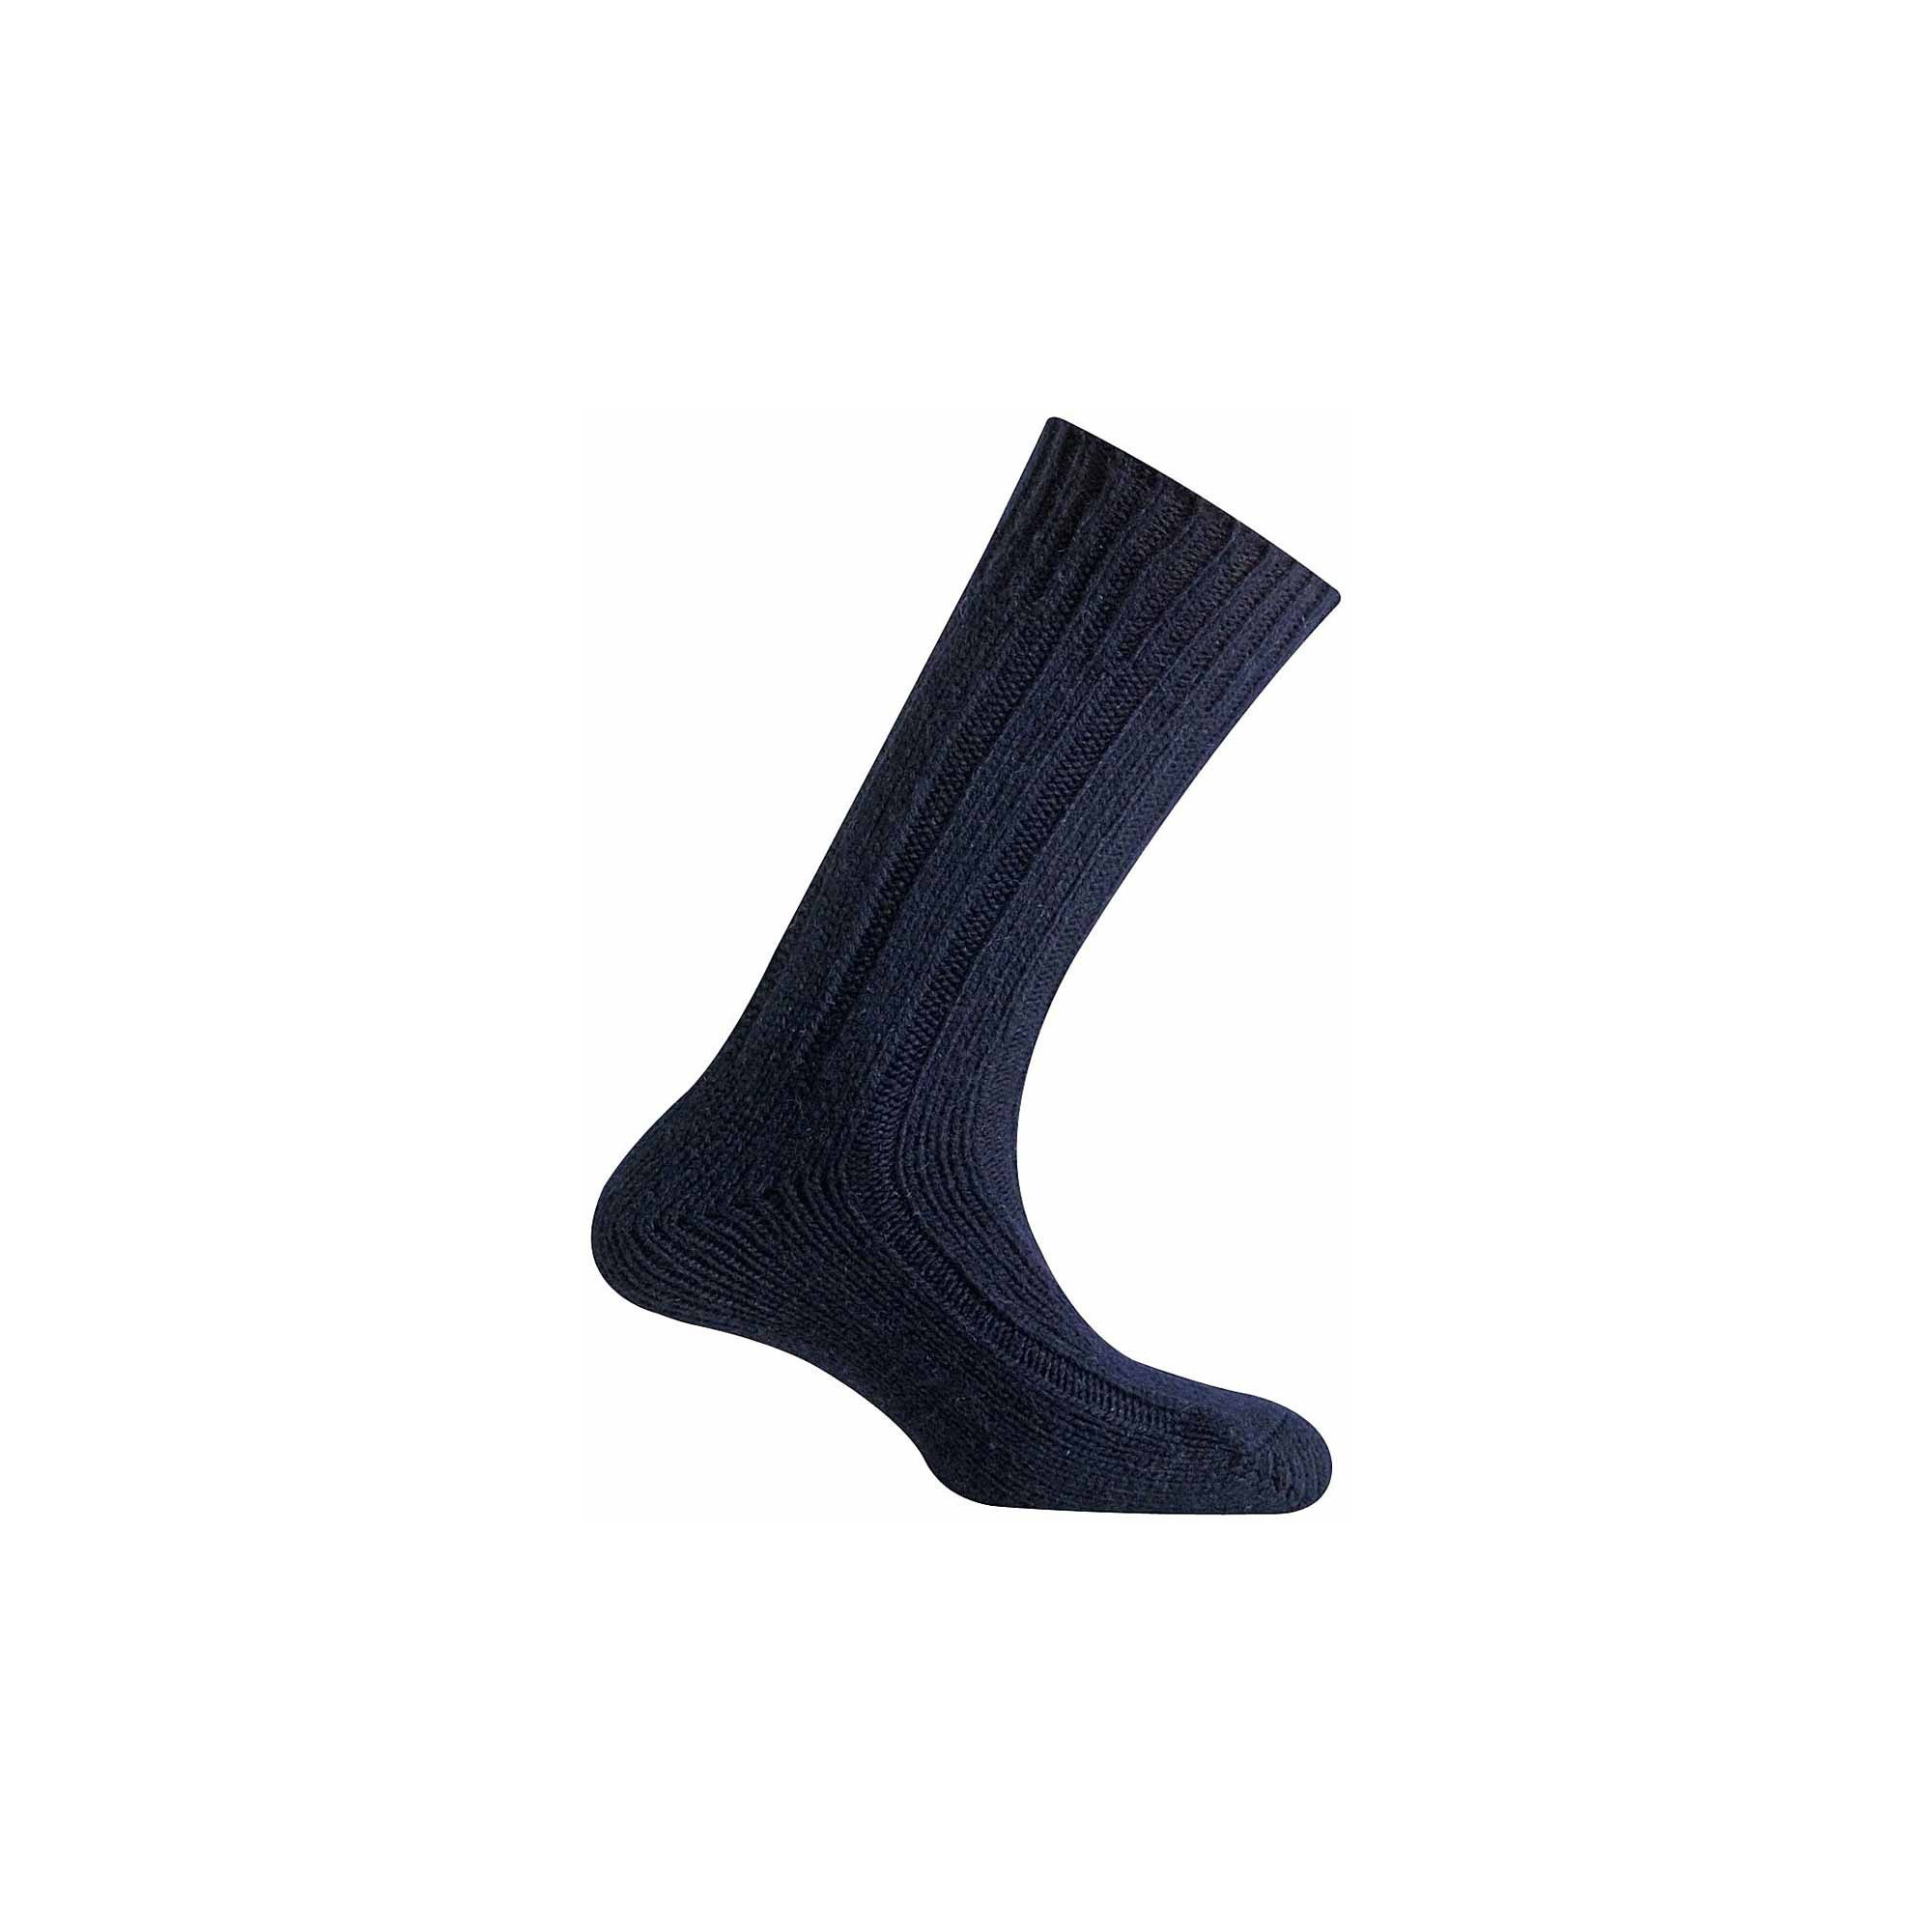 Chaussettes hiver legend Mund - Chaussettes grand froid - Inuka